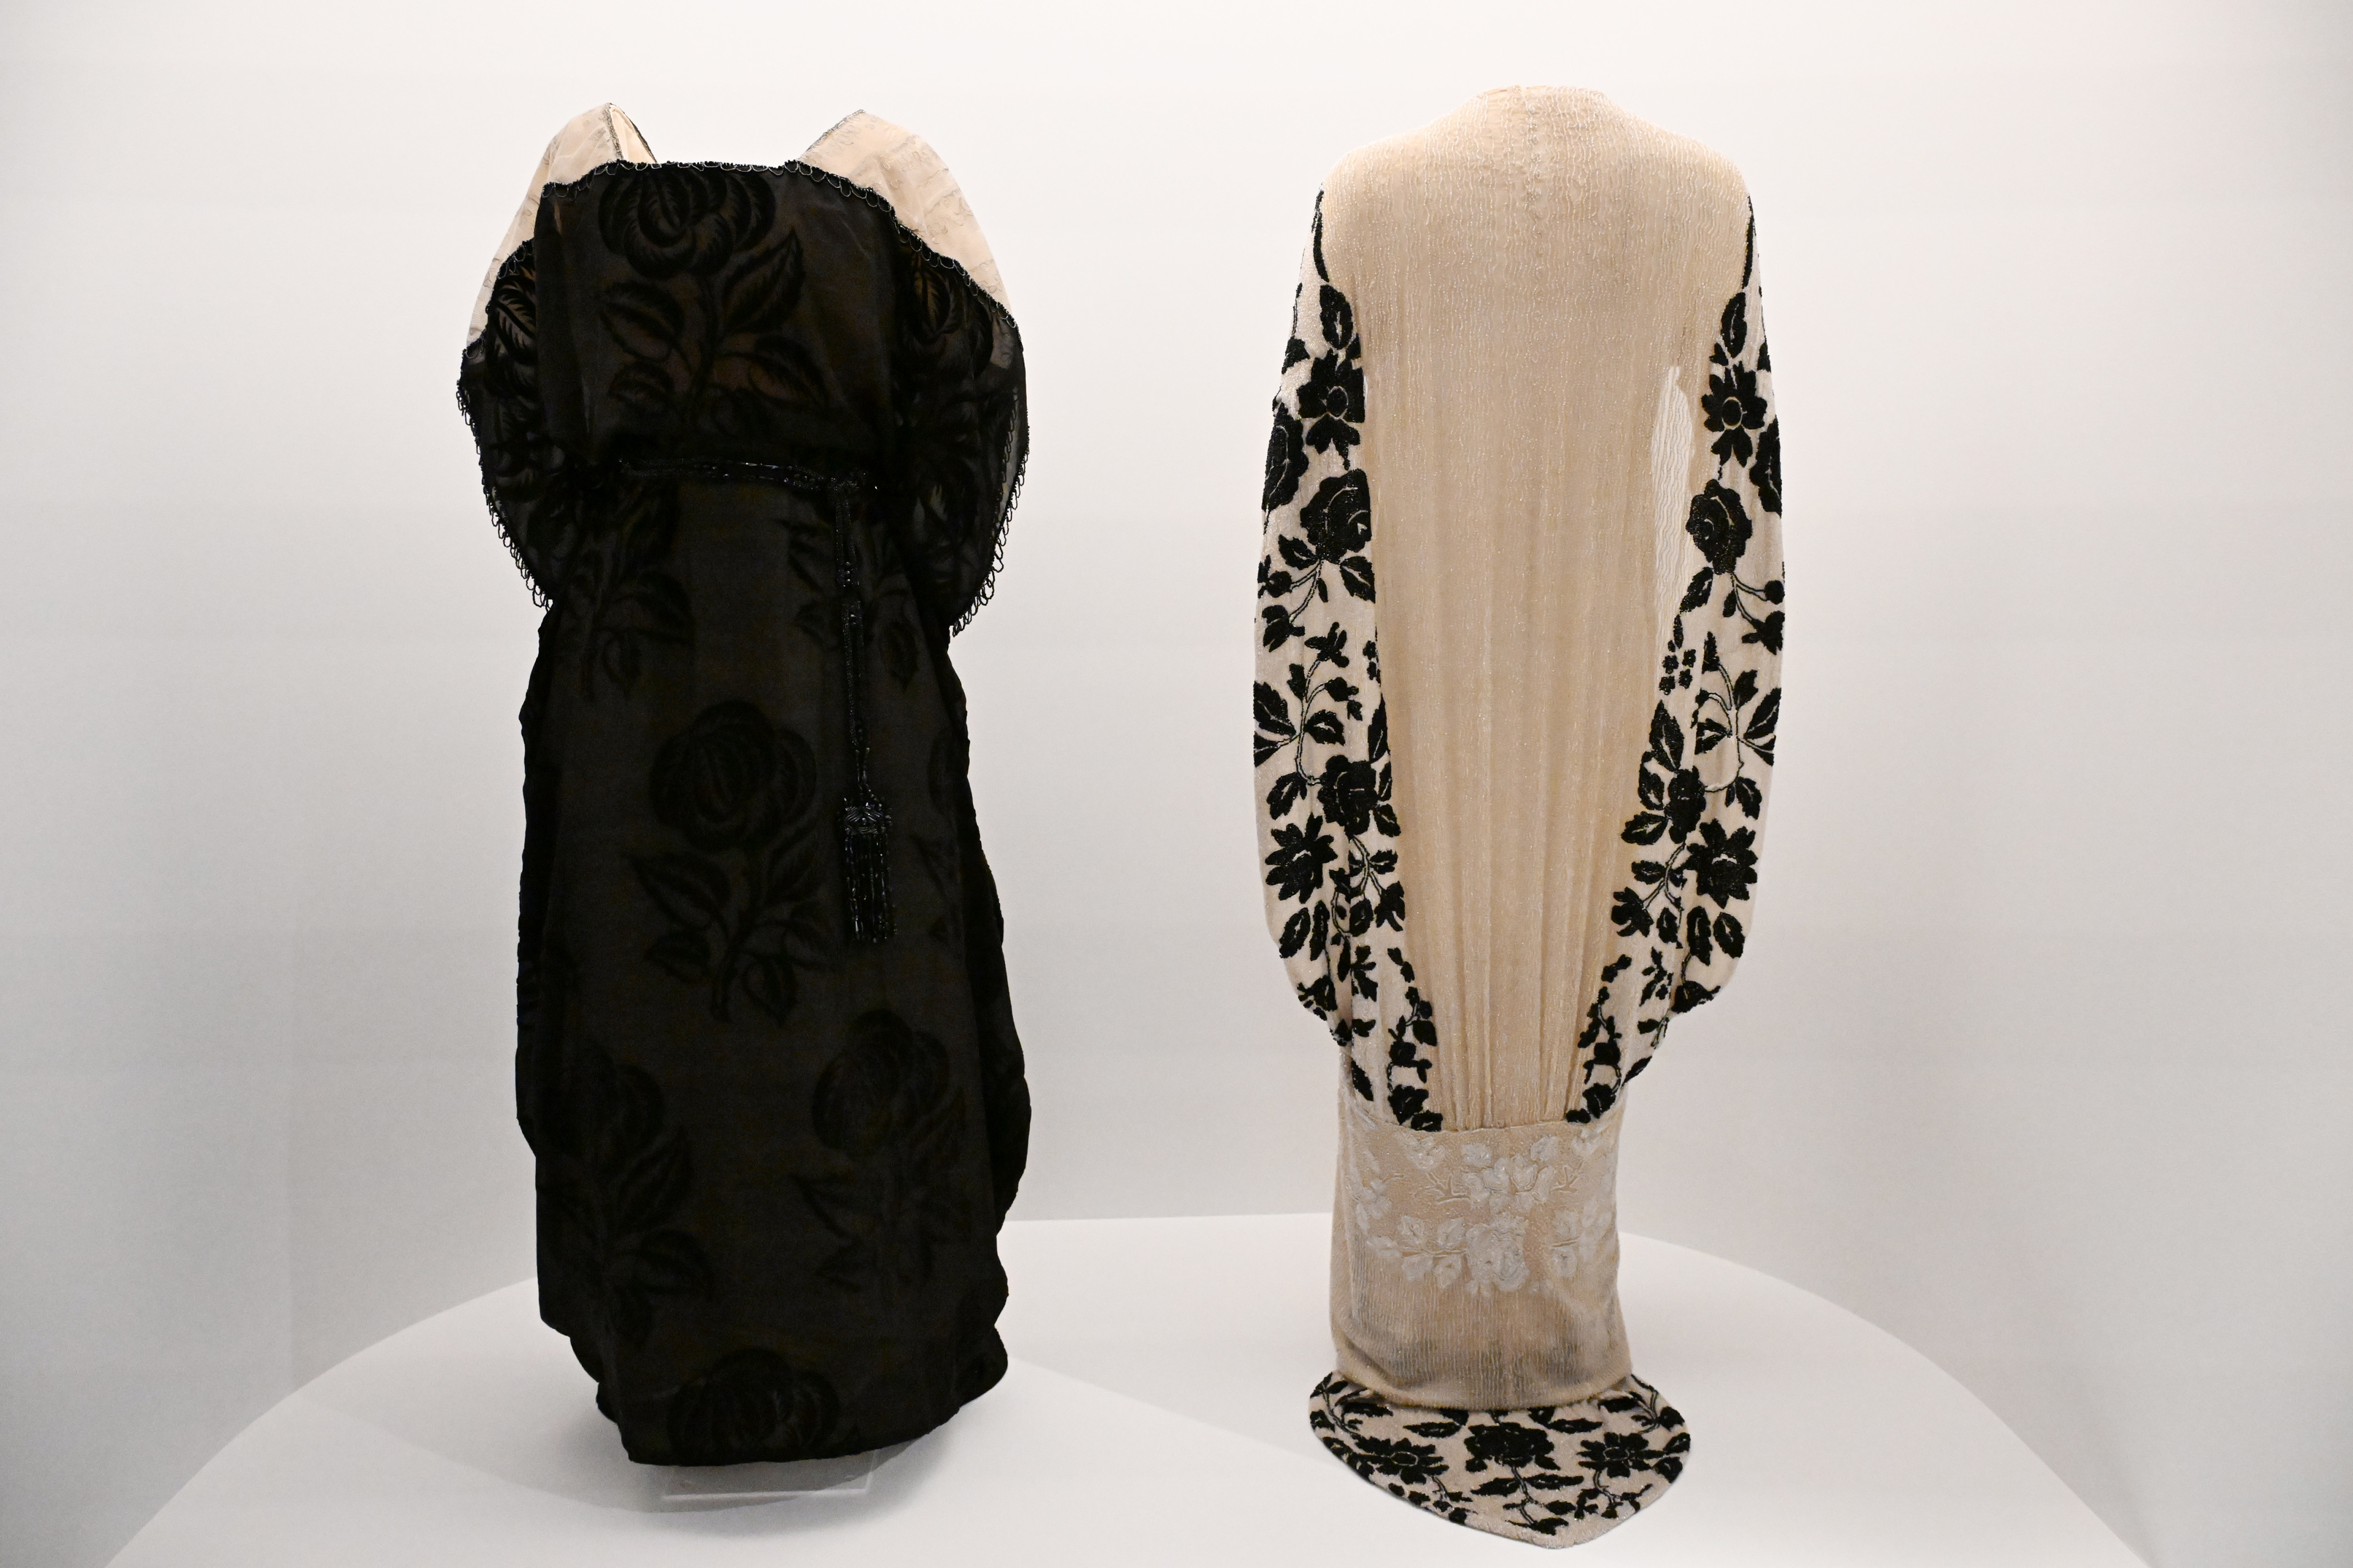 Two vintage dresses on display, one with floral patterns and one with lace detailing